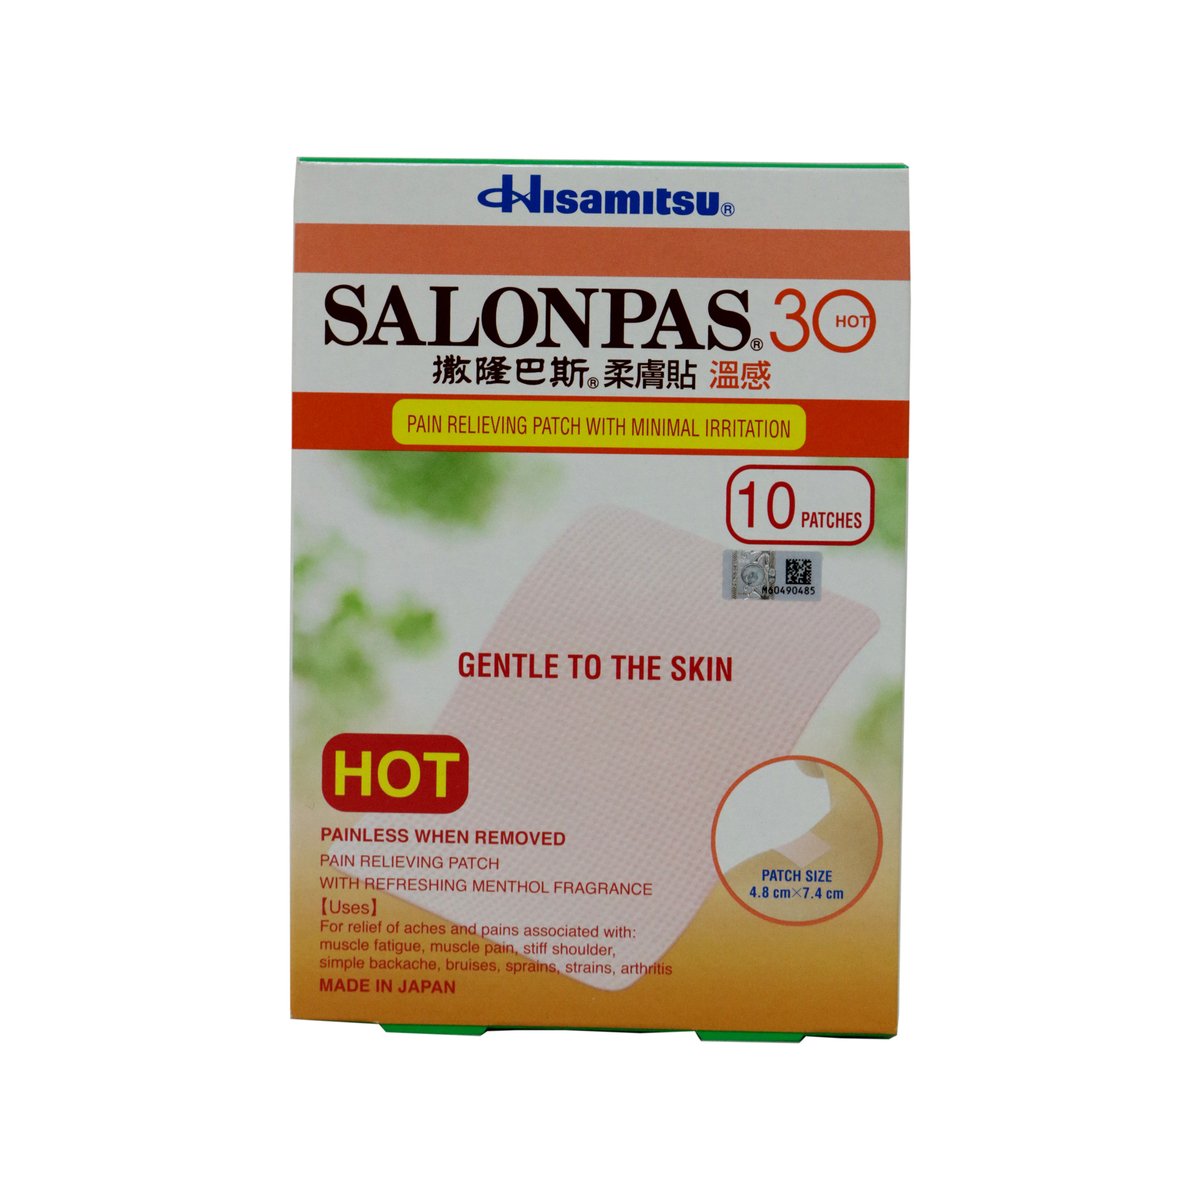 Salonpas 30 Hot Gentle To The Skin 10pcs